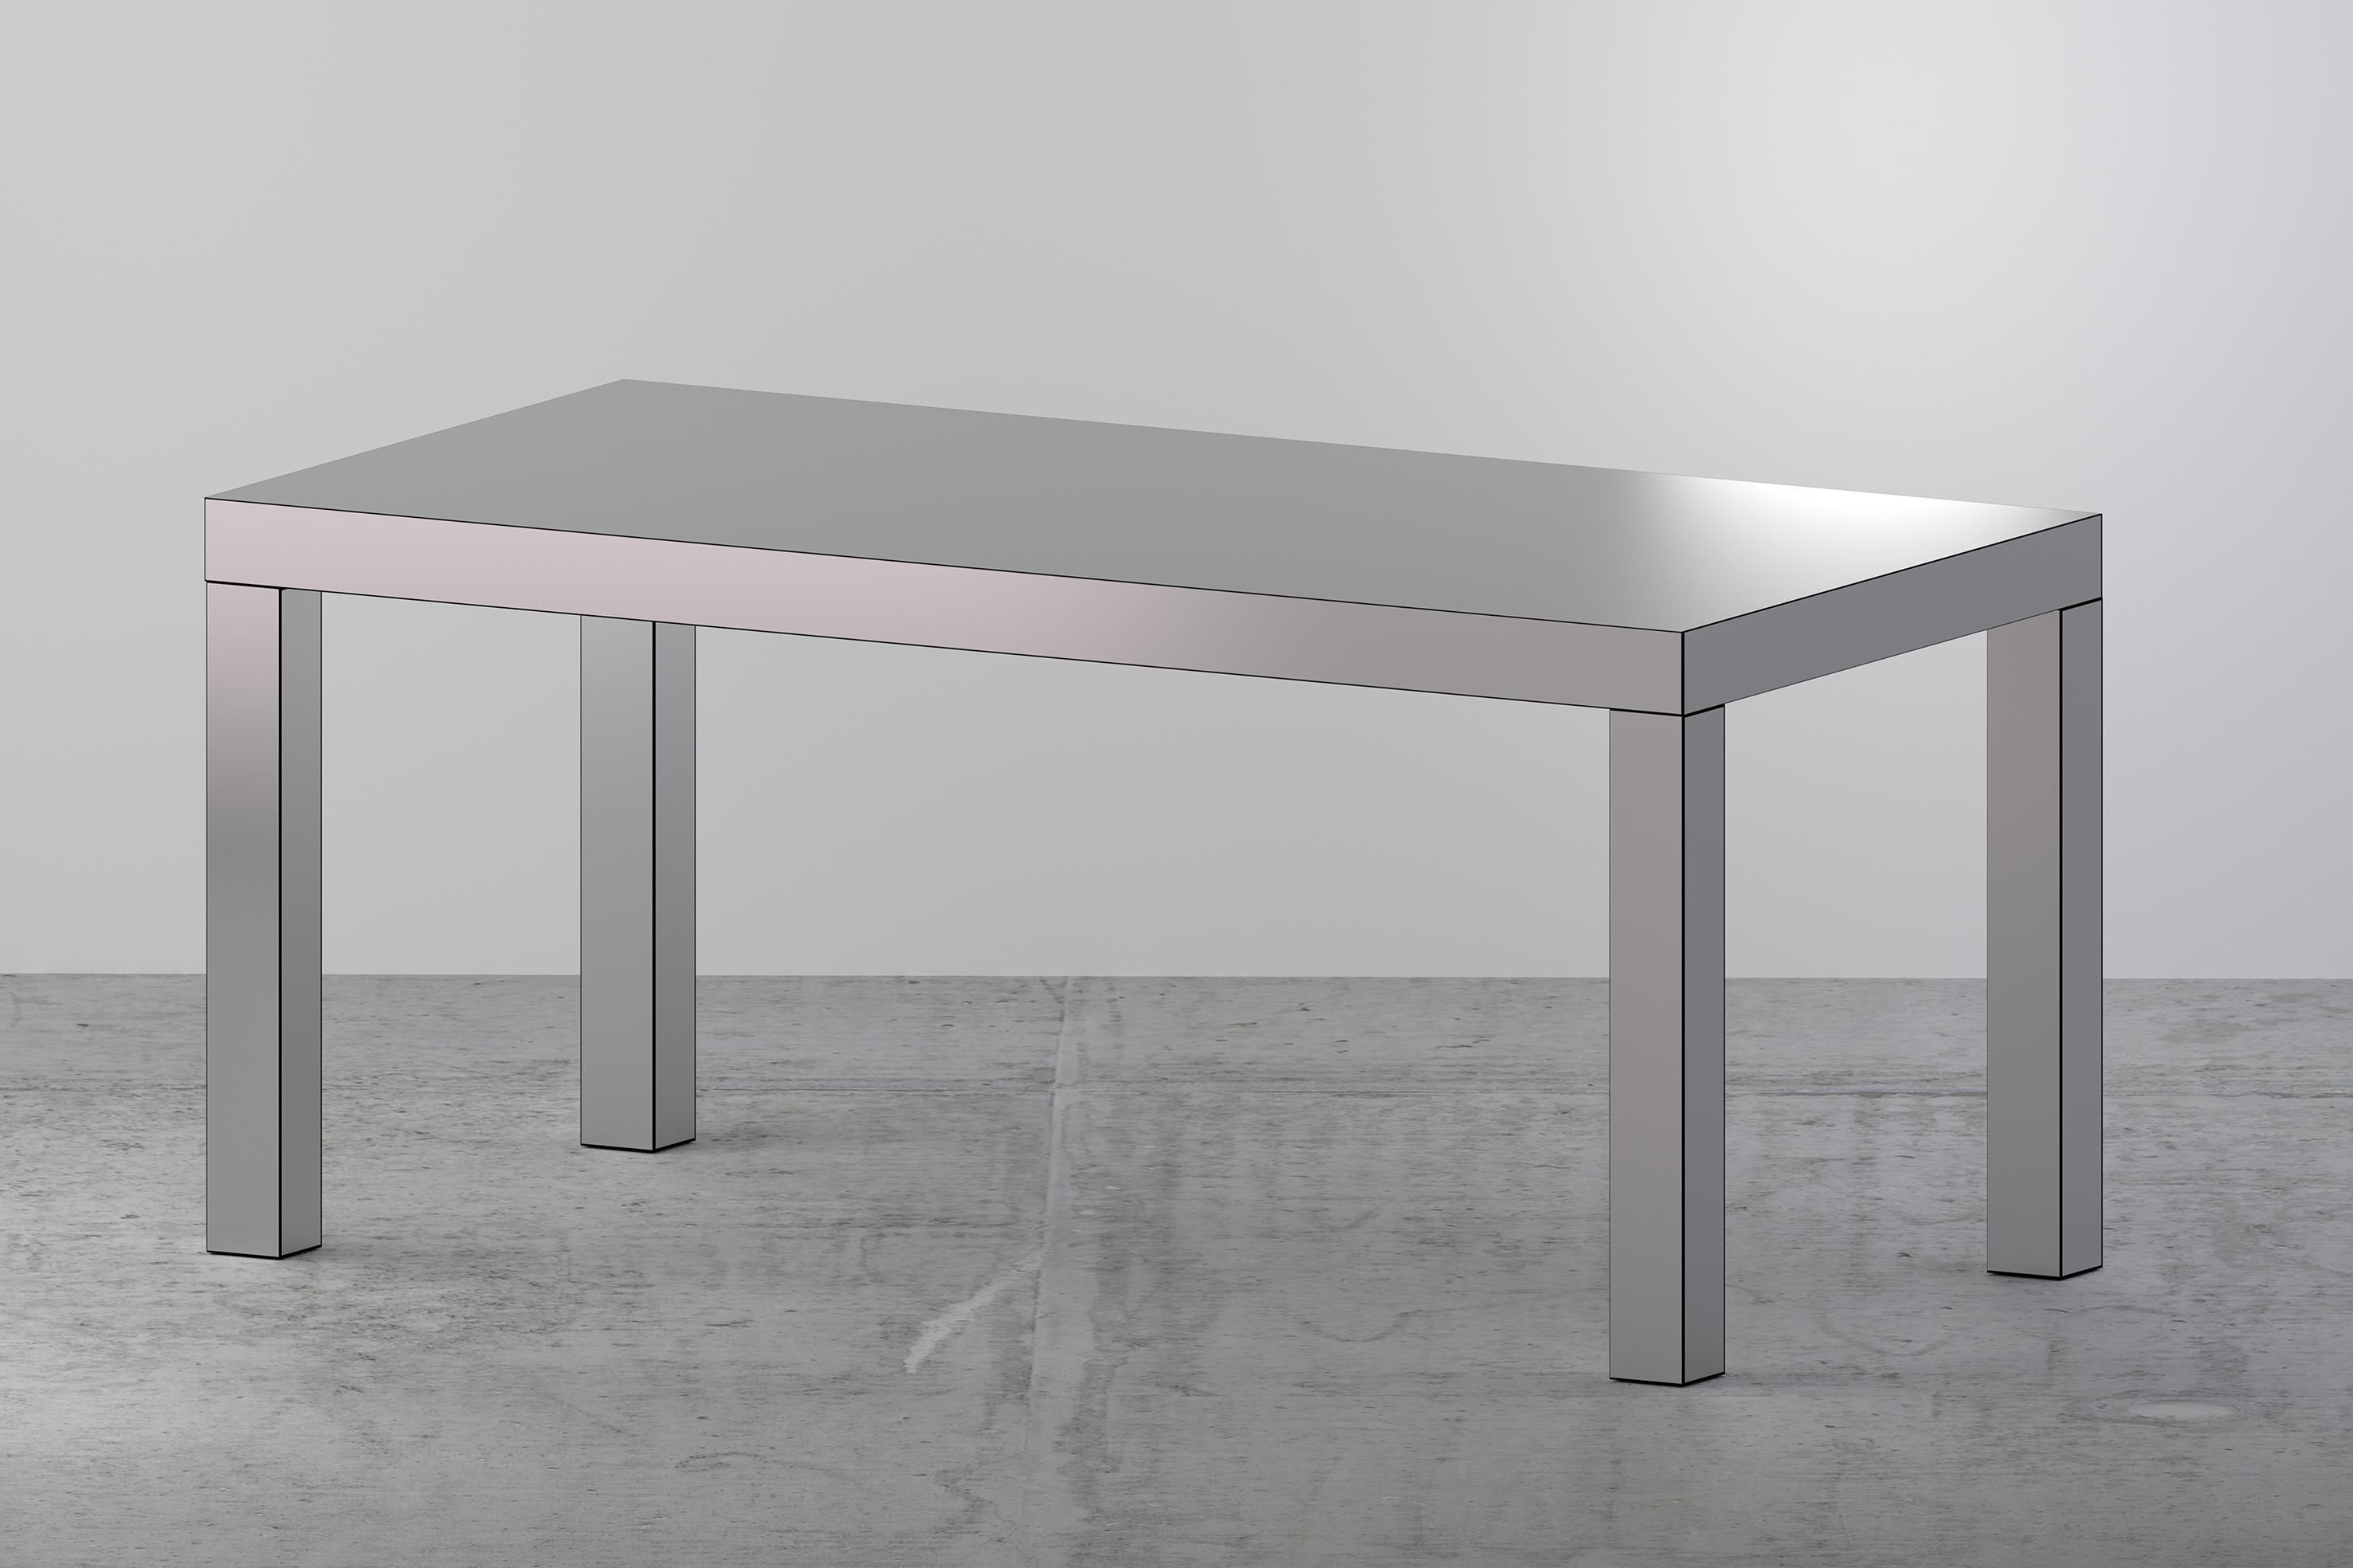 Hitan is a multifunctional table entirely covered by metal HPL Laminates.

Its minimalist structure comprises a rectangular top supported by four square cross-section legs. 
The manufacturing process and research on metal surfaces treatment and